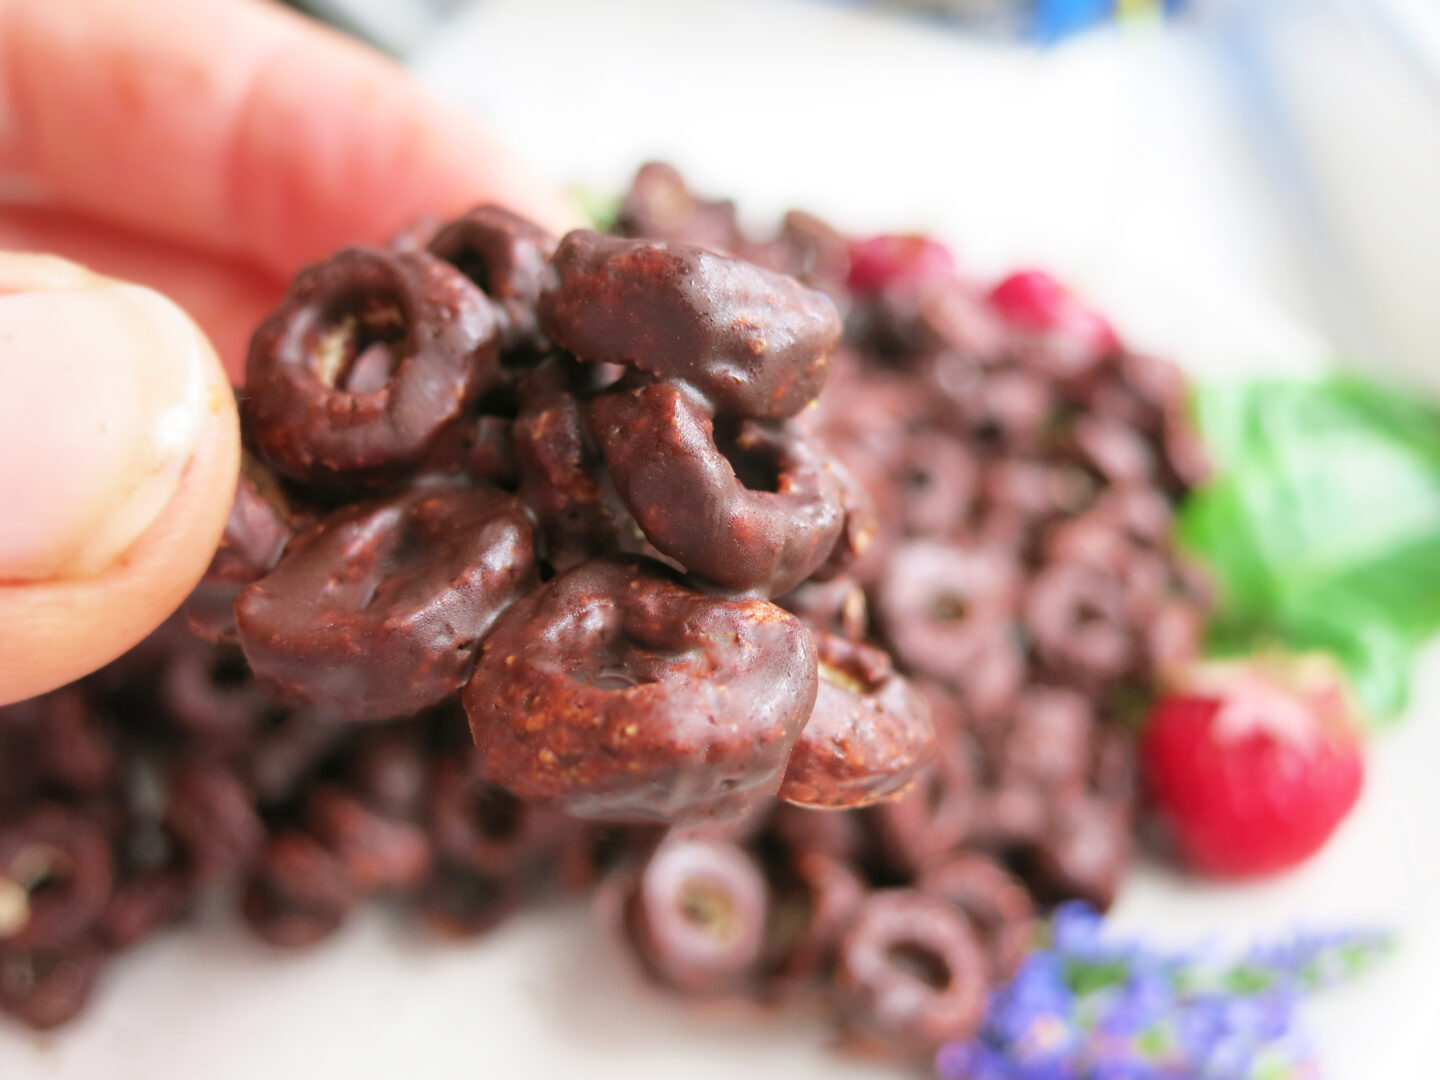 Super simple 2 ingredient Chocolate blueberry cereal treat